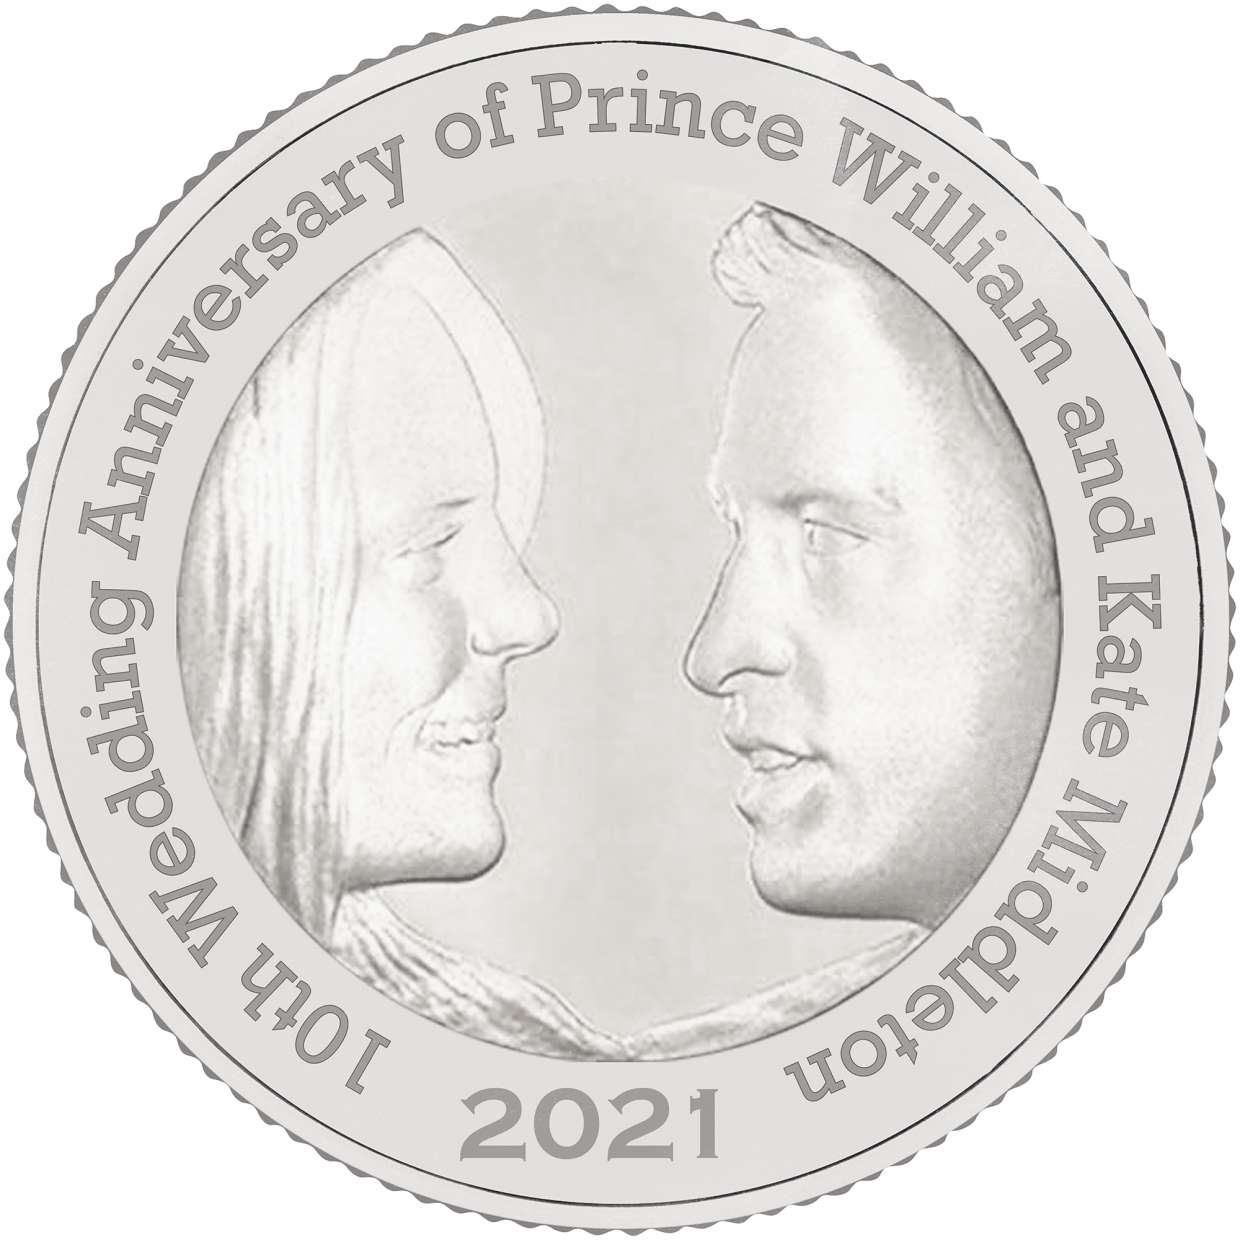 10th Wedding Anniversary of Prince William and Kate Middleton £5 Mock-Up